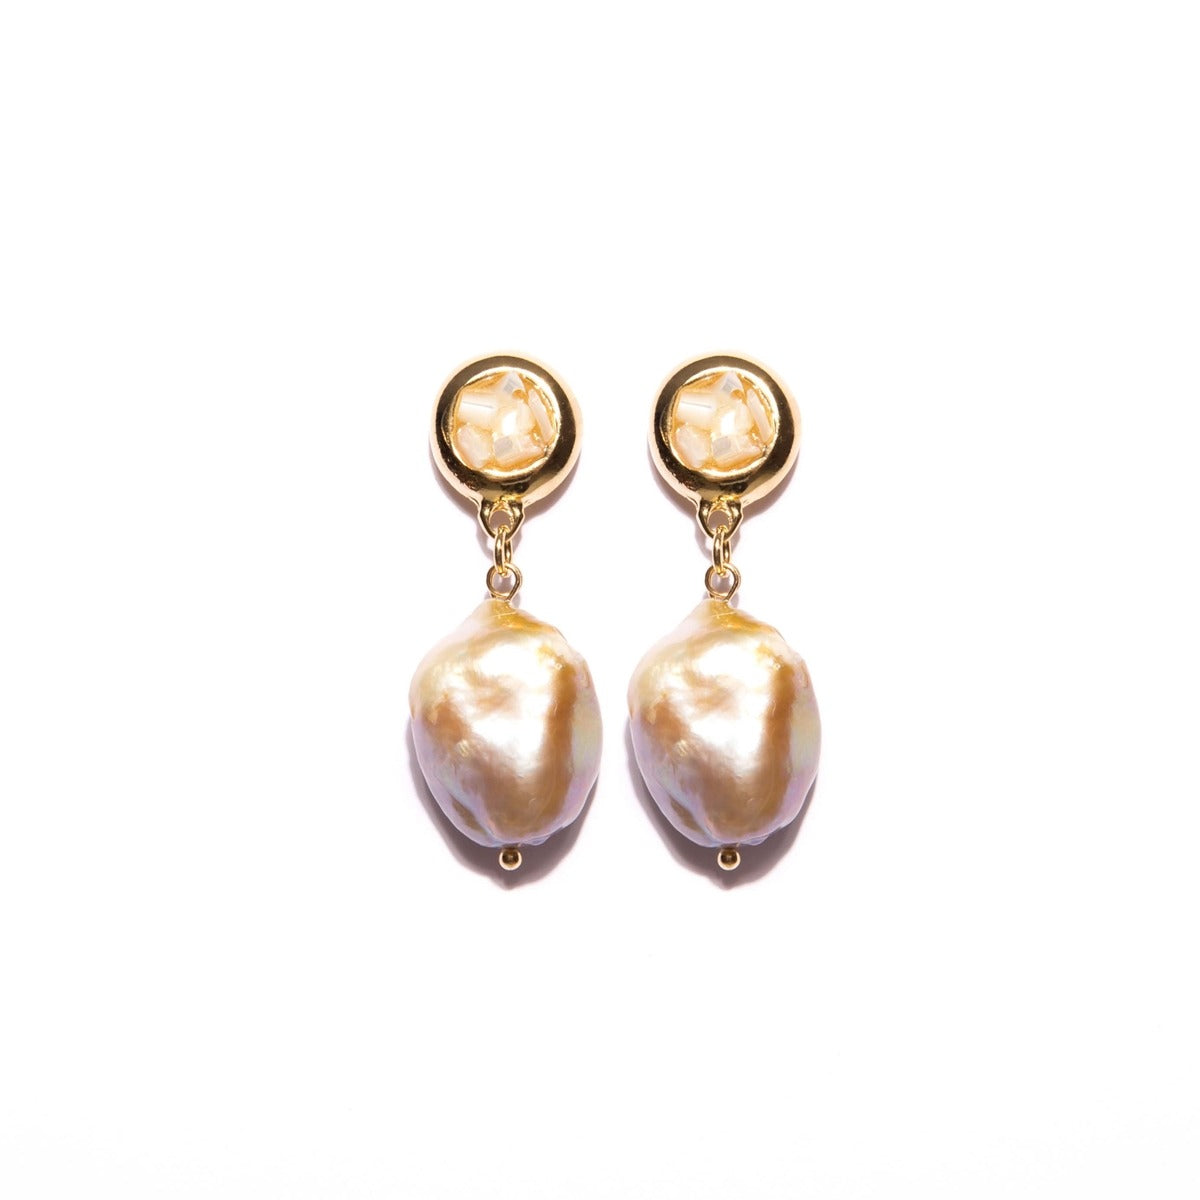 Medium Gold-Plated "Gravel" Earrings with Mother-of-Pearl and Natural Pearl